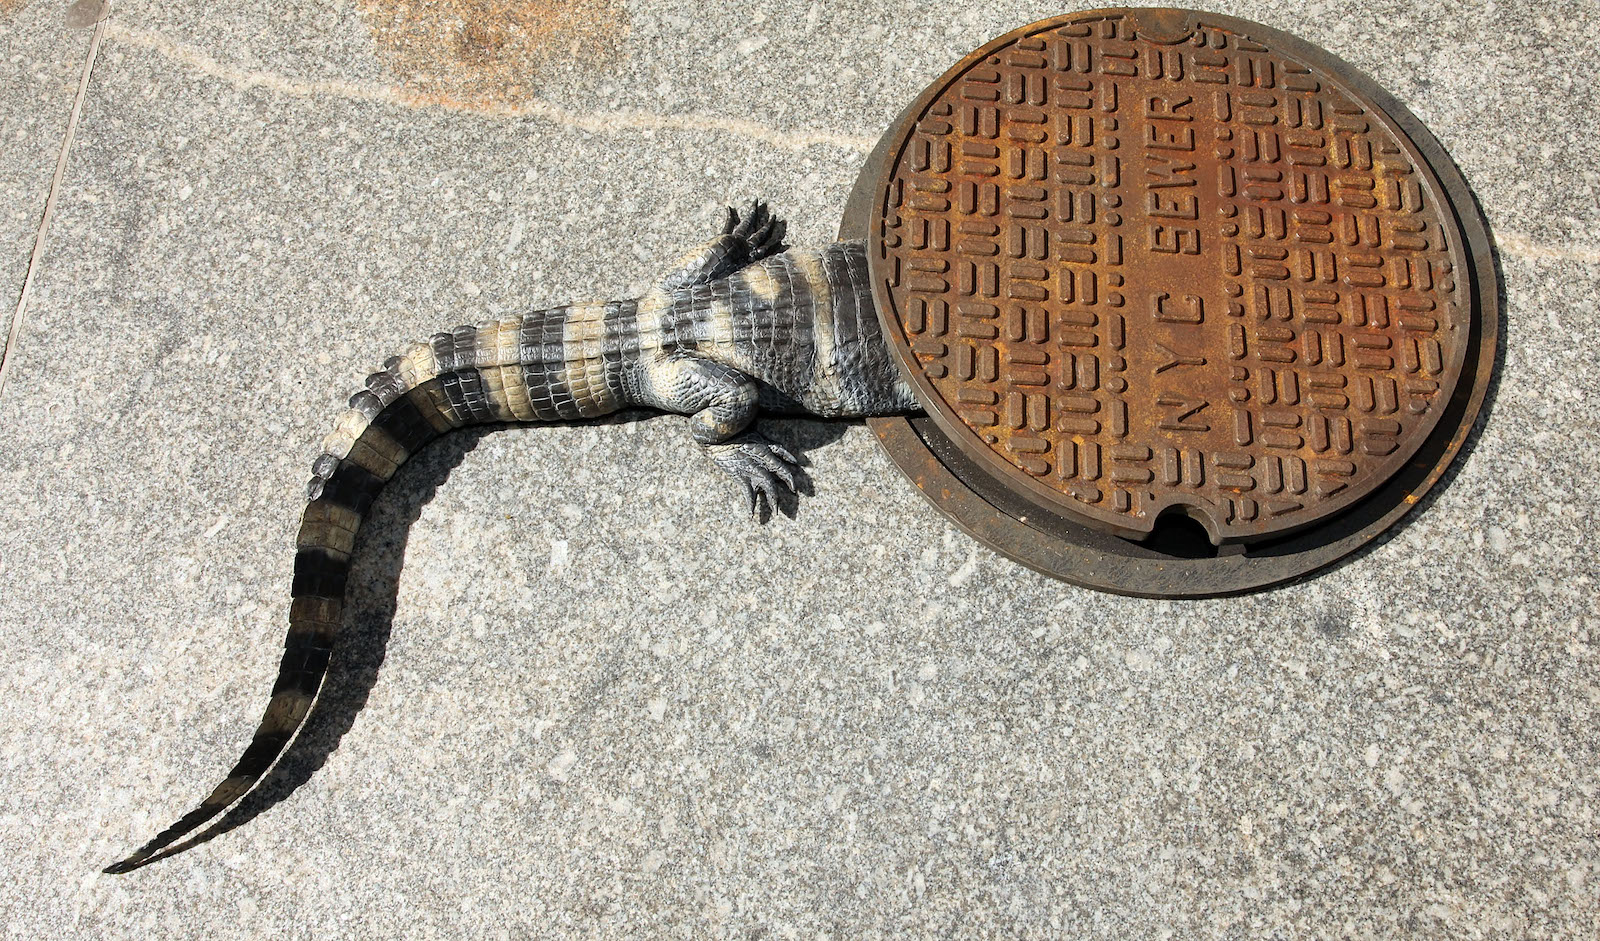 A fake aligator prop sticks halfway out of a NYC sewer manhole